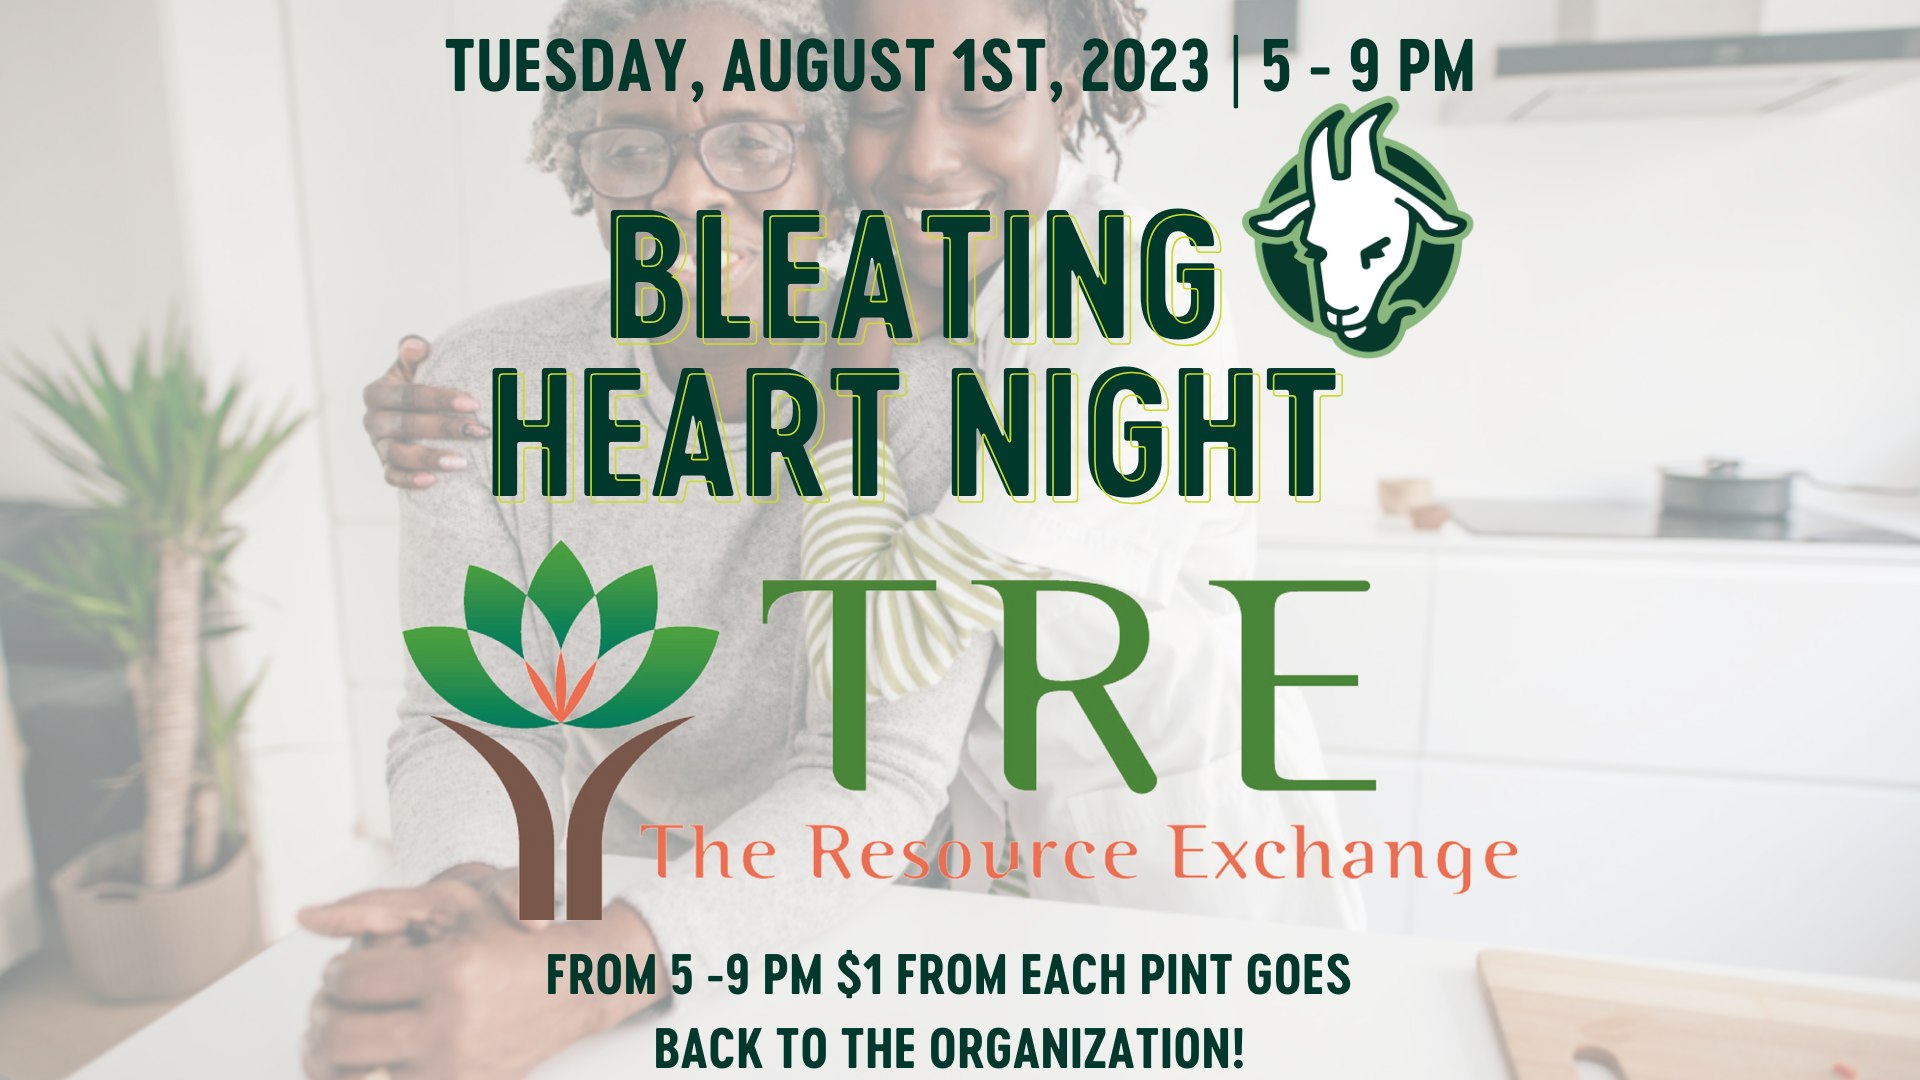 Bleating Heart Night is at Goat Patch Brewing Company August 1st from 5pm to 9pm; one dollar from each pint sold benefits The Resource Exchange